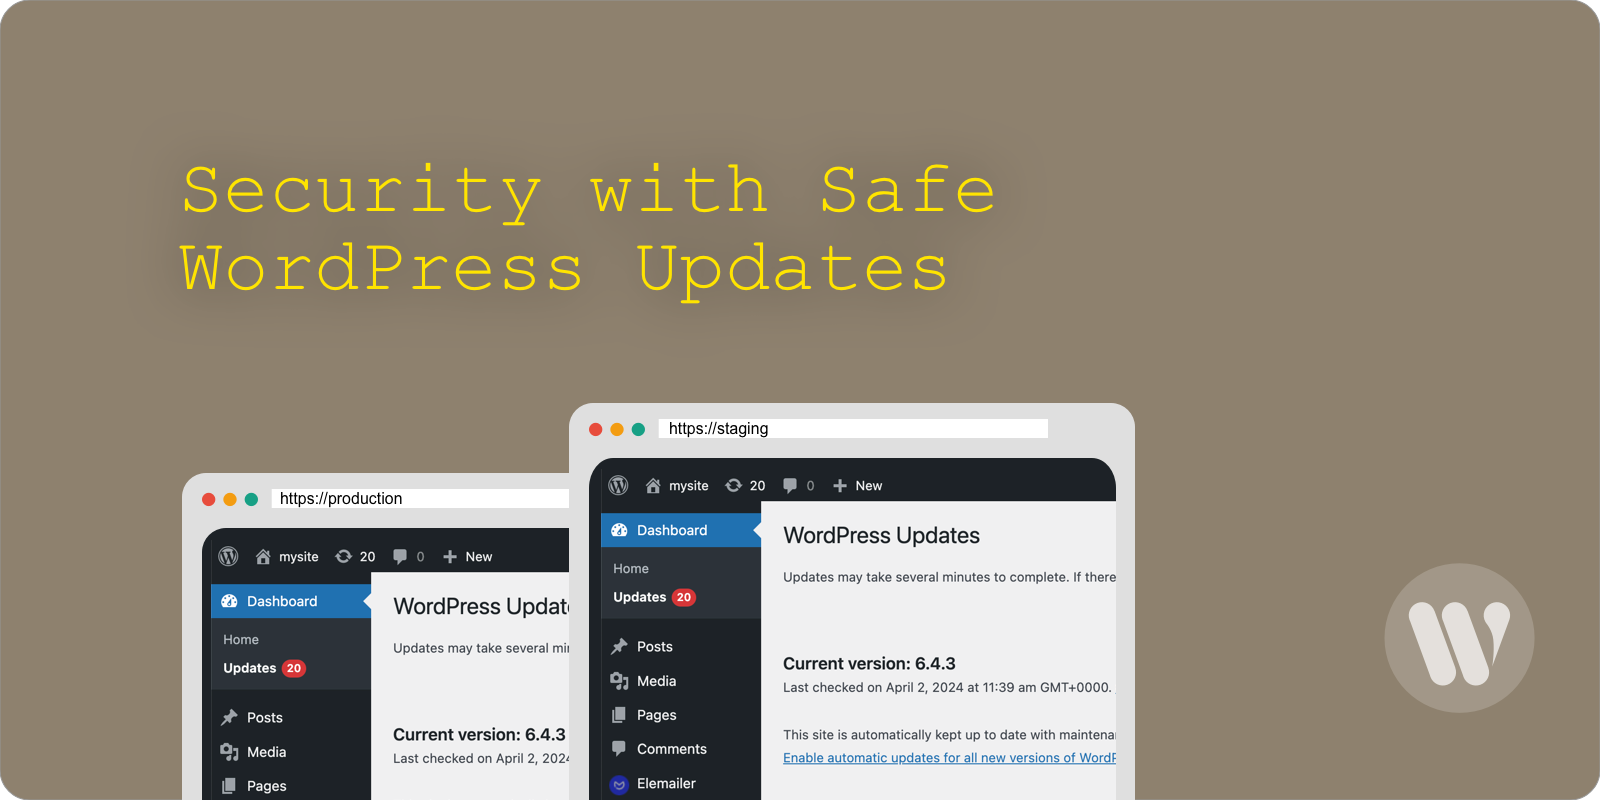 Safely Update to Keep WordPress Secure